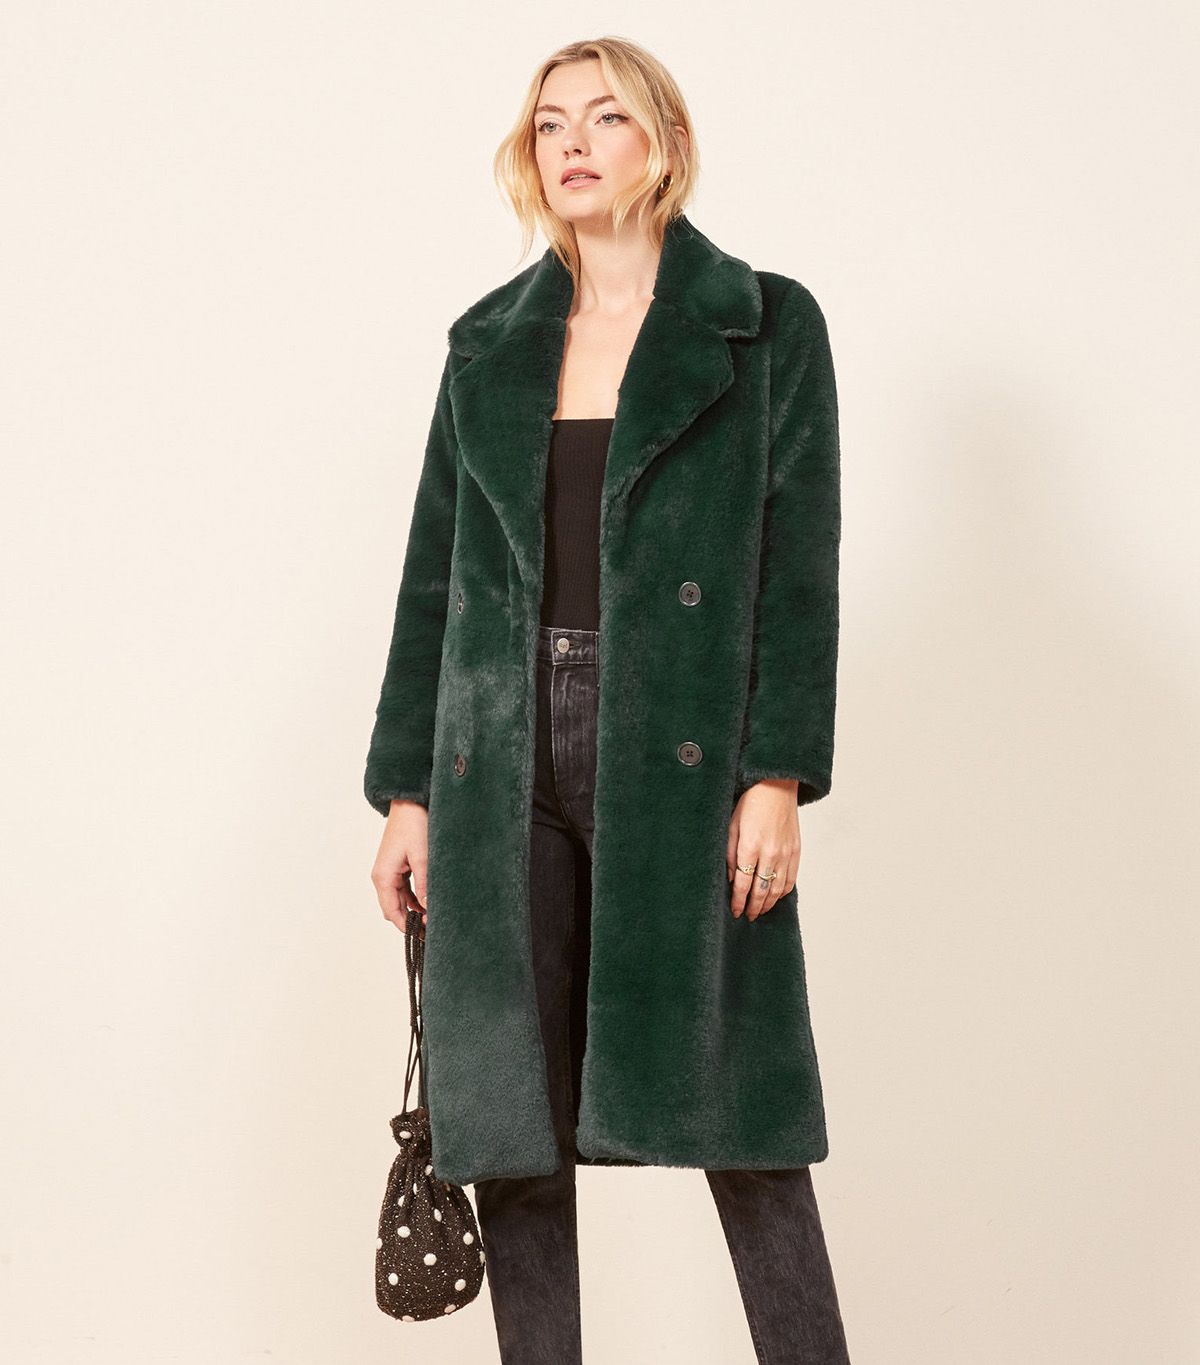 19 Stylish Faux-Fur Coats for Fall and Winter | Who What Wear